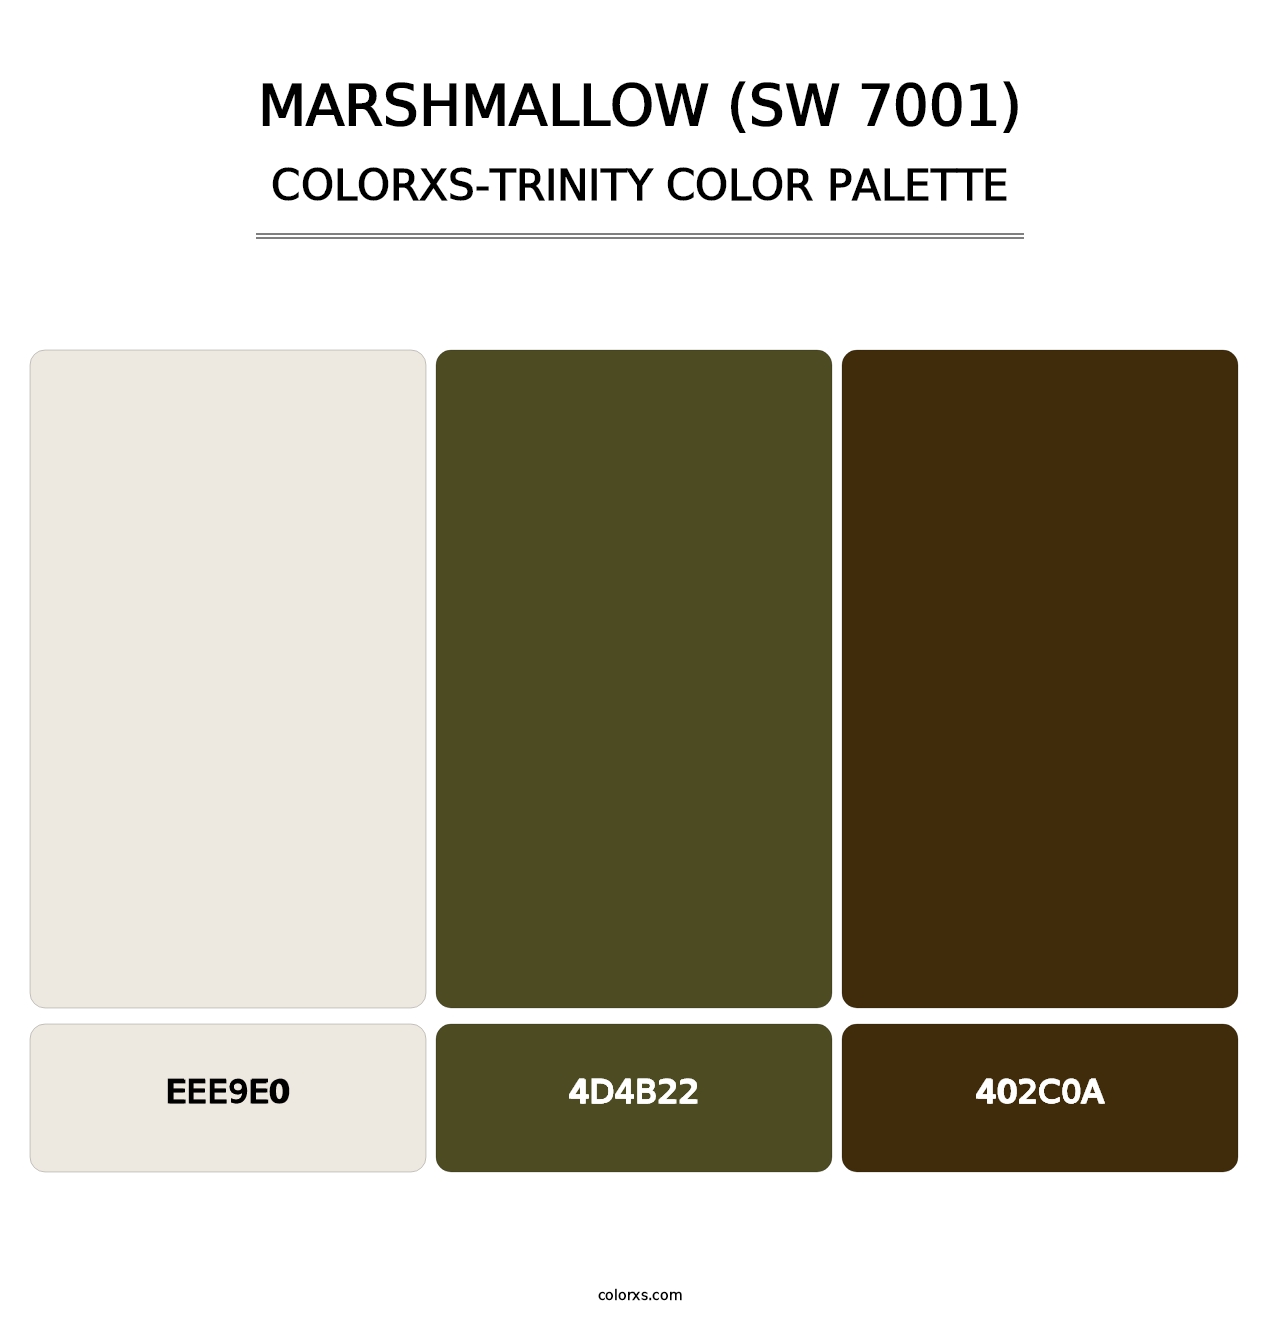 Marshmallow (SW 7001) - Colorxs Trinity Palette